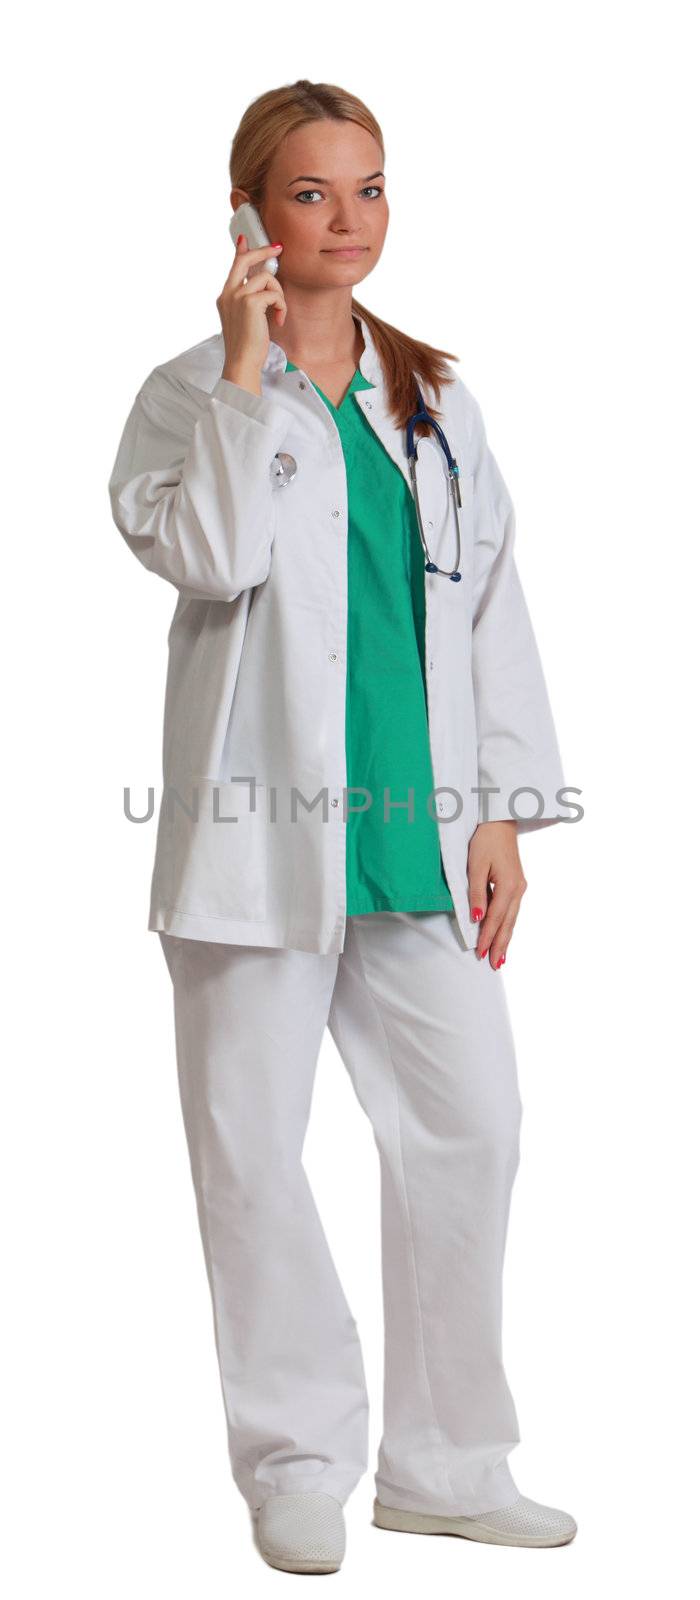 Young blonde woman doctor on the phone isolated against a white background.